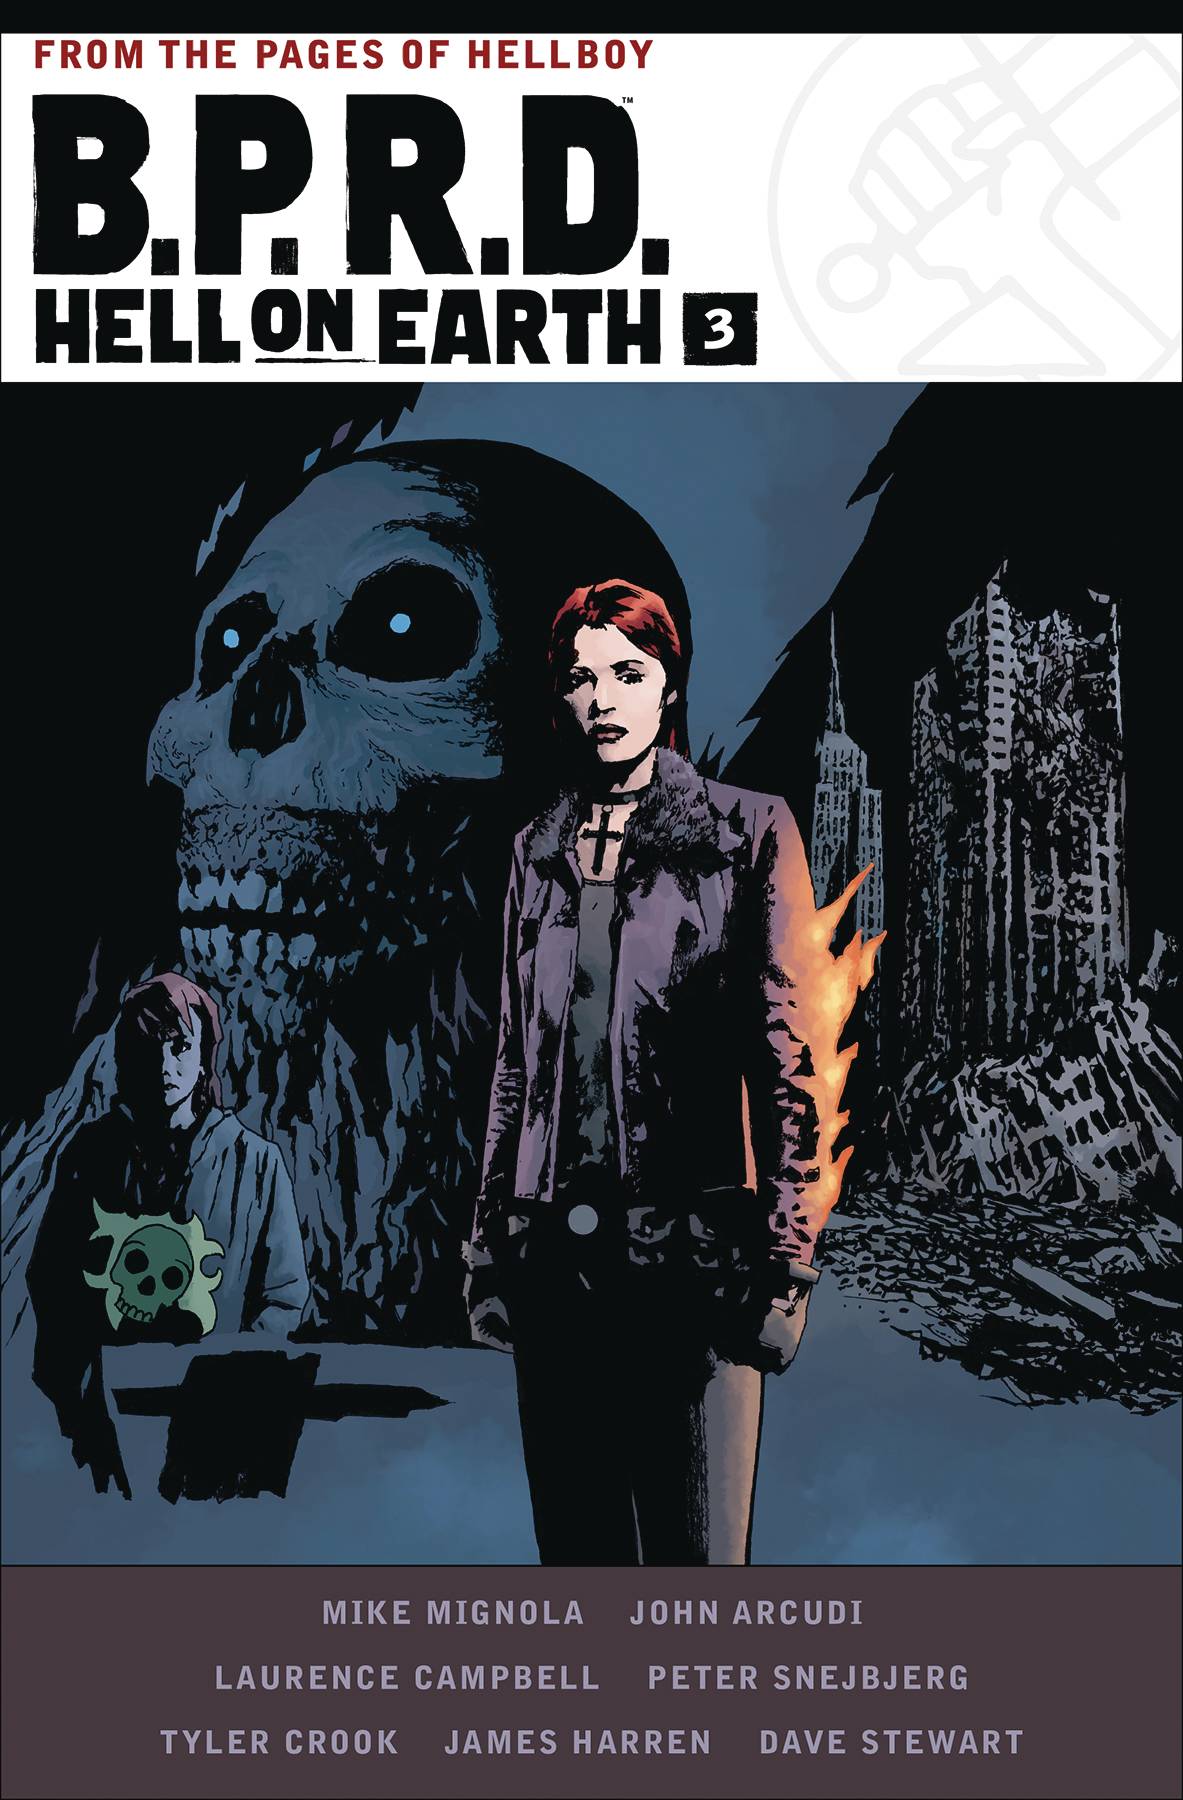 B.P.R.D. Hell on Earth Hardcover Volume 3